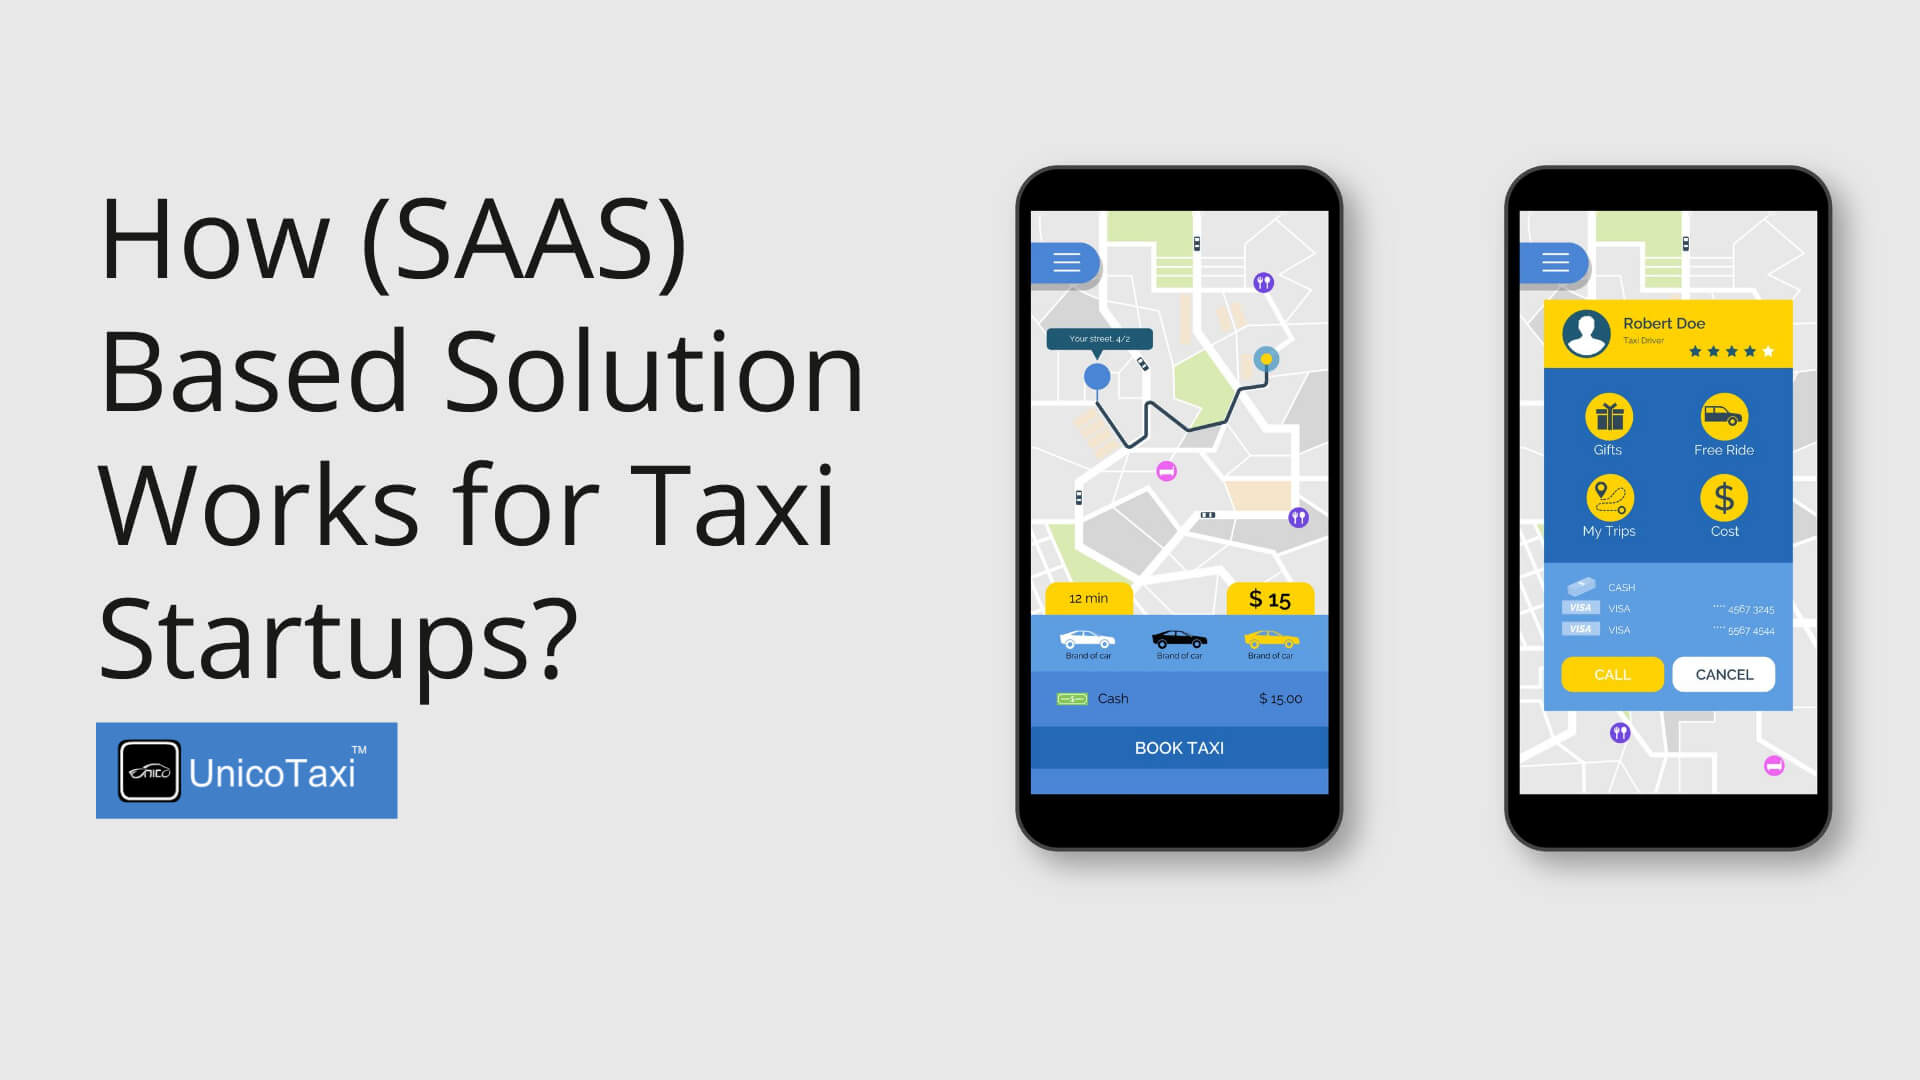 How SaaS Based Solution Works for Taxi Startups?